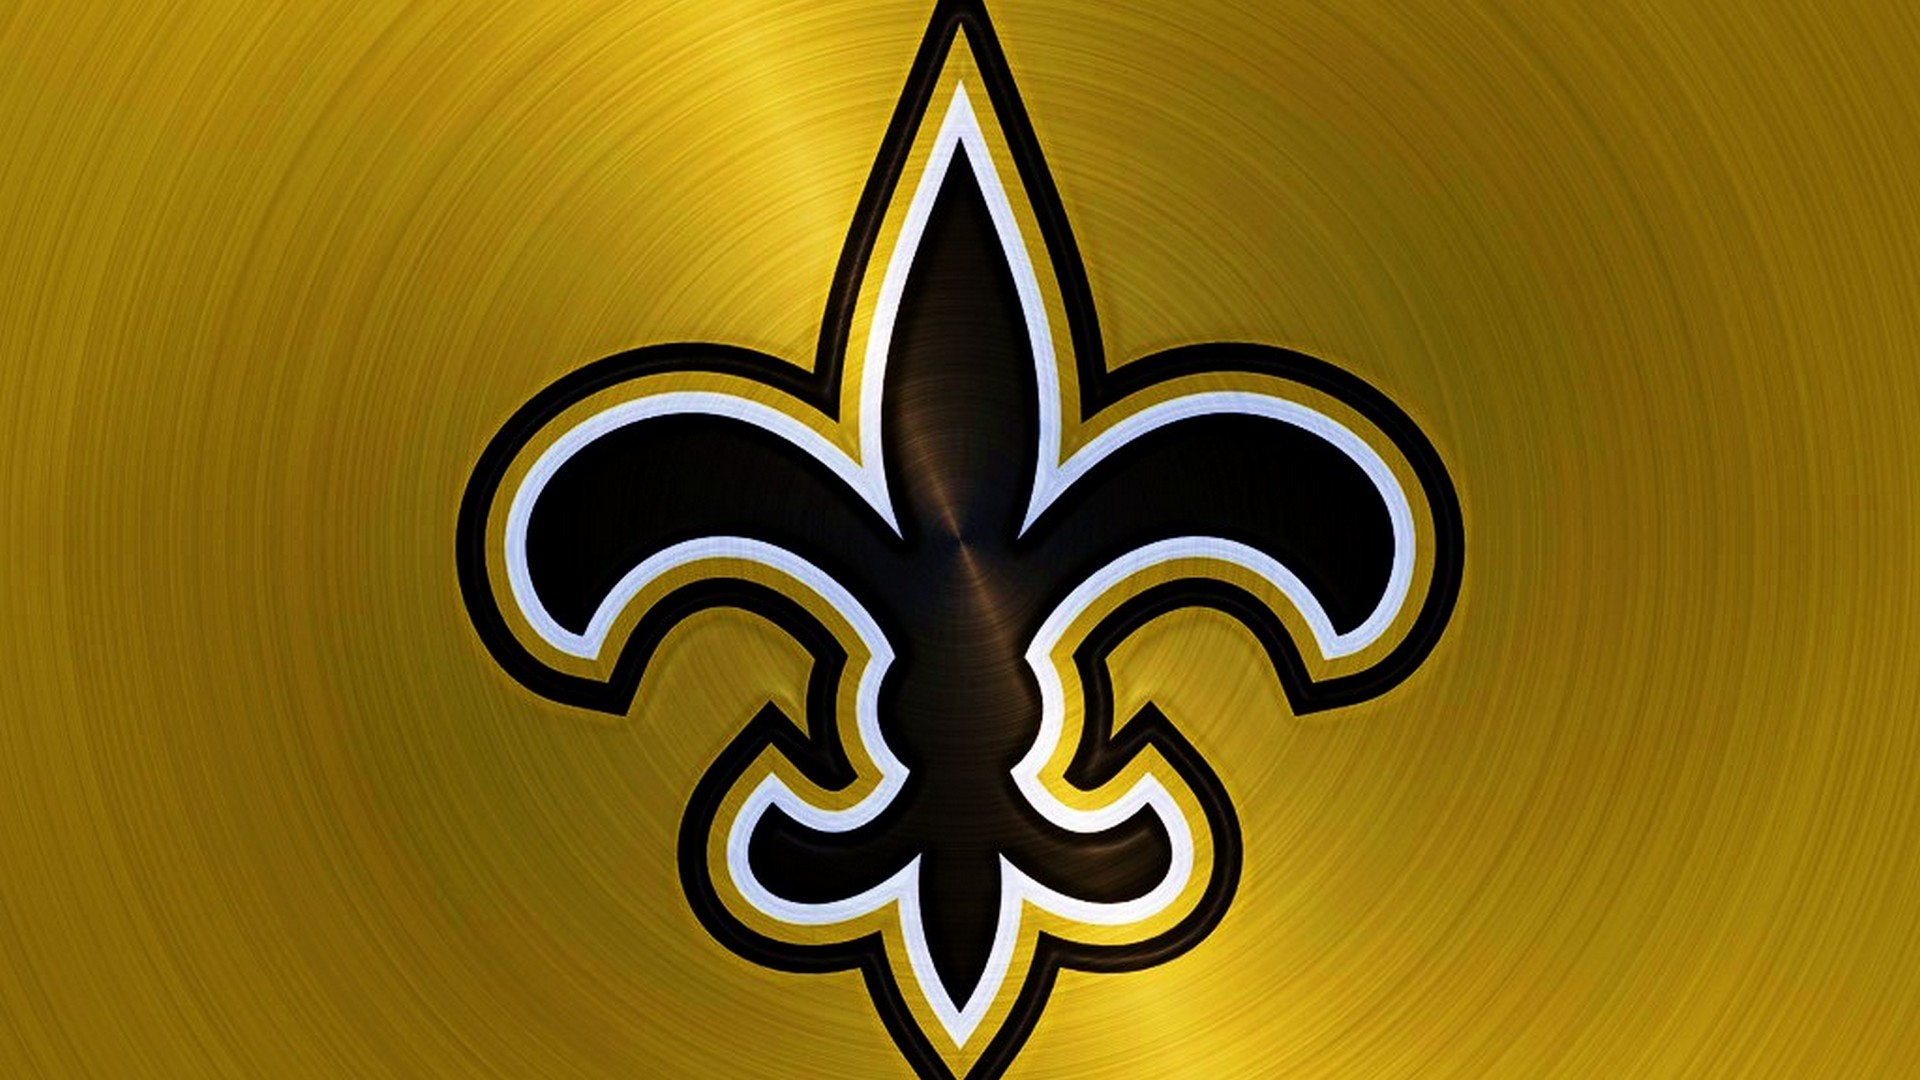 Wallpapers HD New Orleans Saints NFL with resolution 1920x1080 pixel. You can make this wallpaper for your Mac or Windows Desktop Background, iPhone, Android or Tablet and another Smartphone device